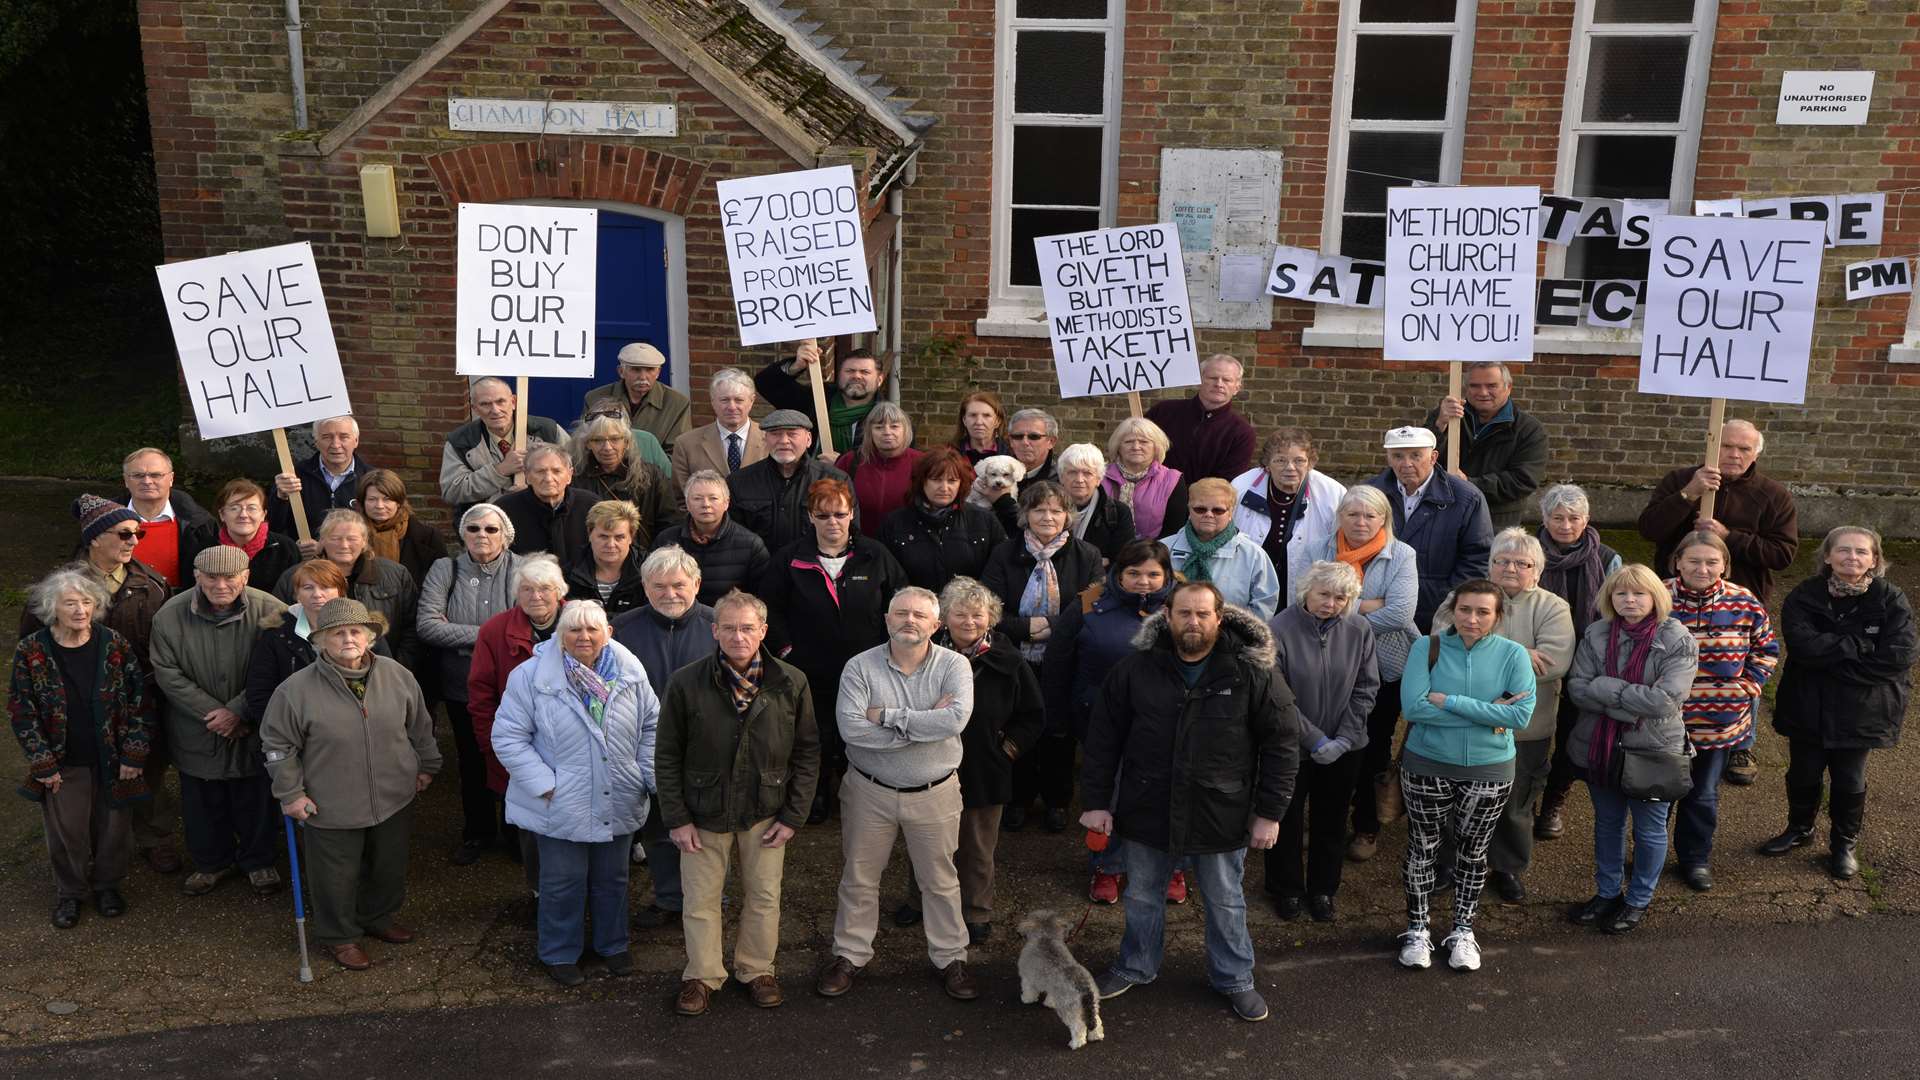 Villagers say they feel betrayed after the Methodists broke a promise to sell them the hall.